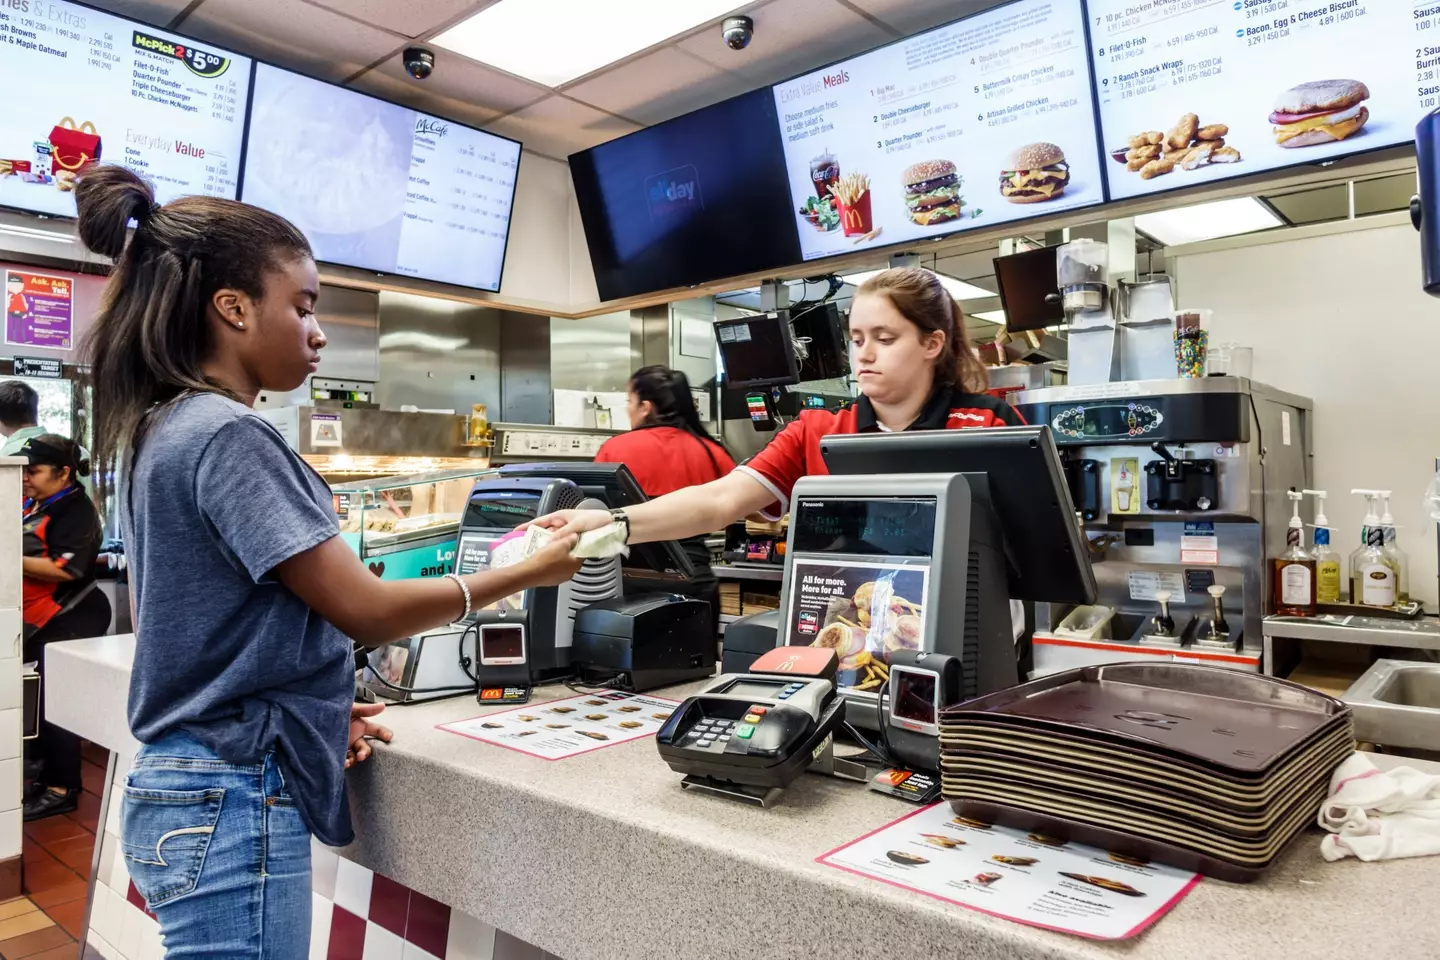 The fast-food restaurant charges for packets to prevent the system being abused